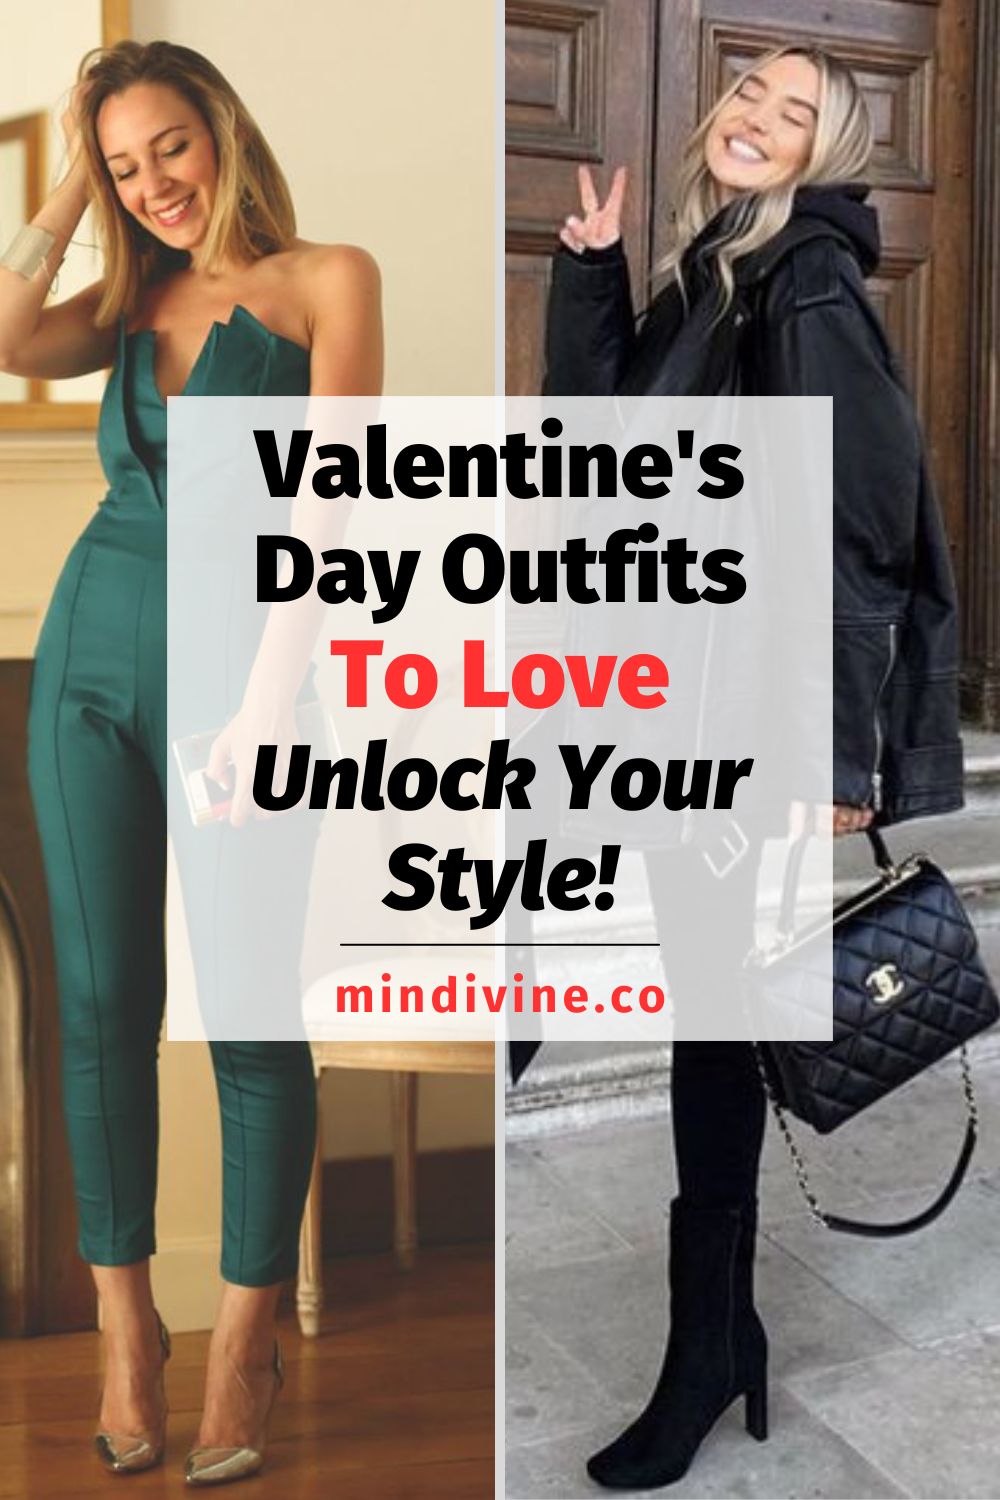 Valentine's Day Outfits: 2 Looks